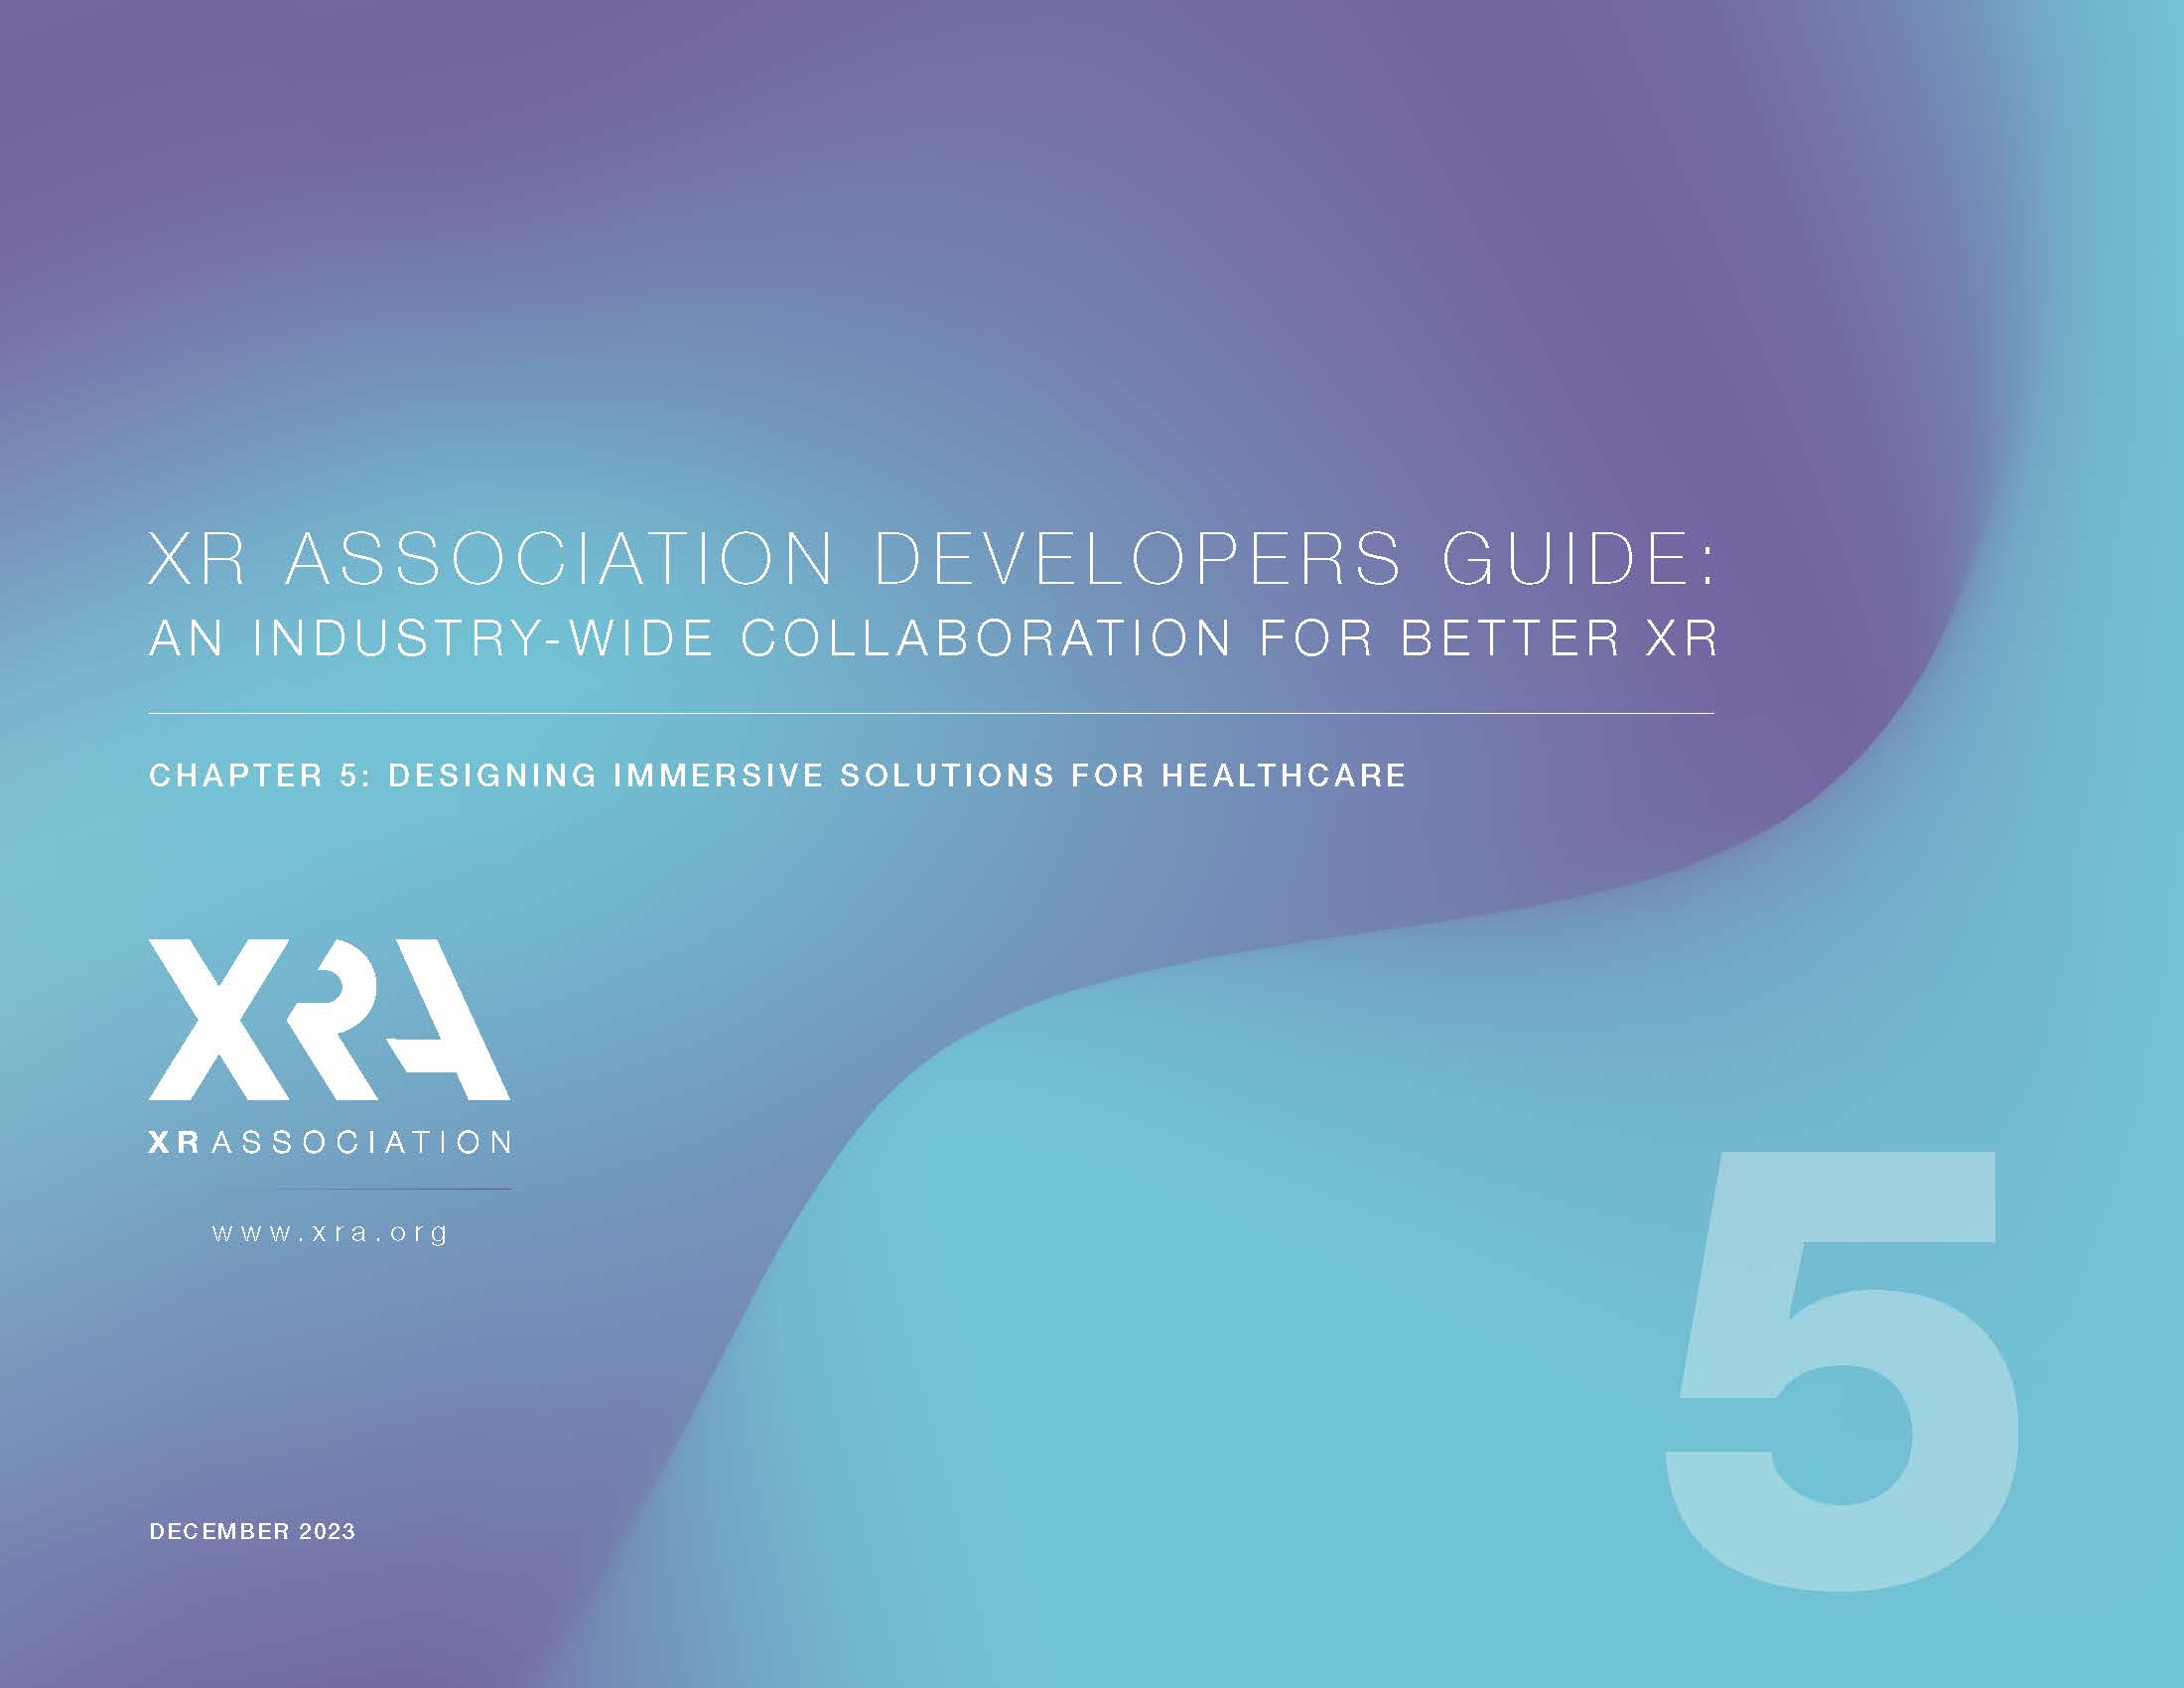 XR ASSOCIATION RELEASES FIFTH CHAPTER OF DEVELOPERS GUIDE FOCUSED ON HEALTHCARE